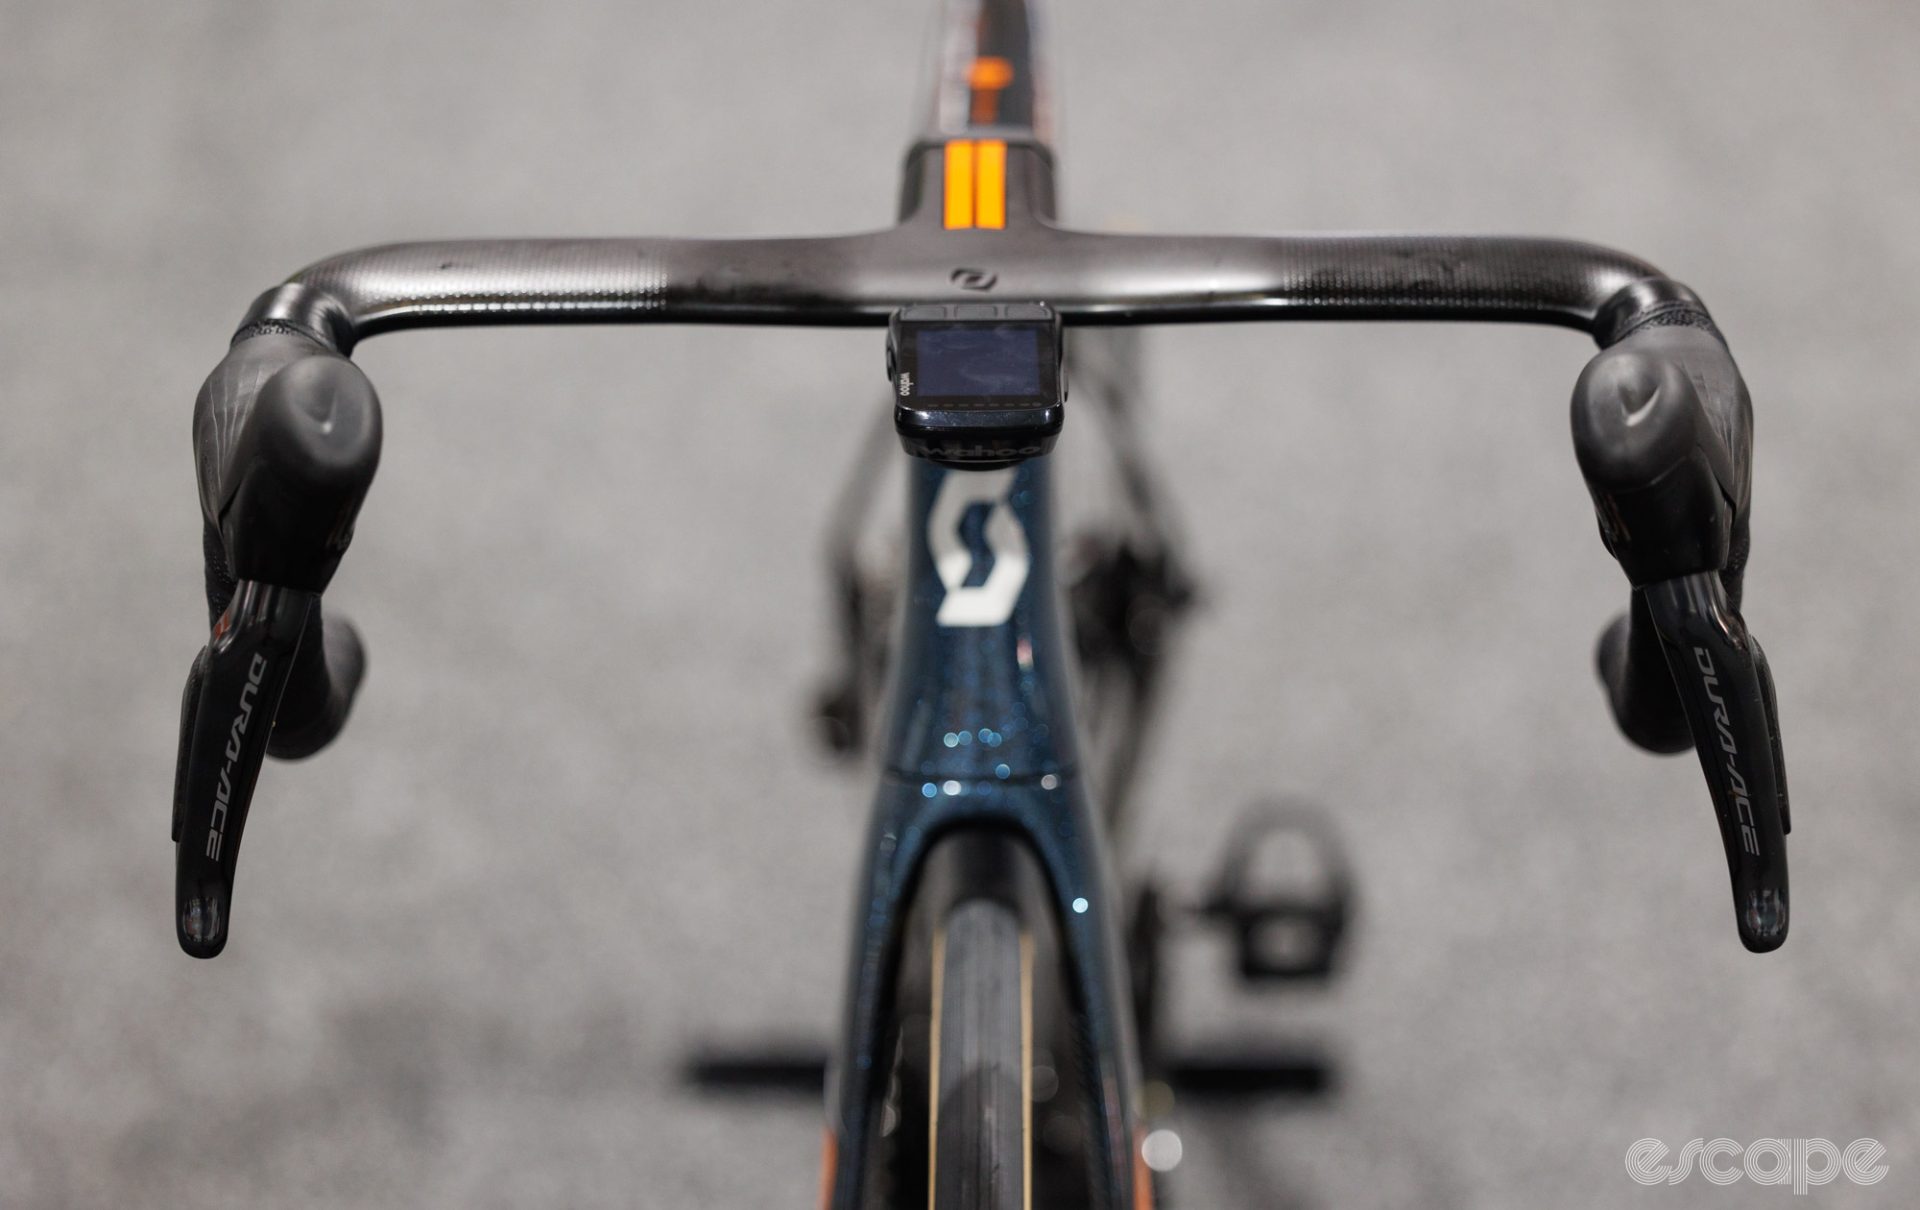 A front view of the Foil with slight inward turn to the brake levers.